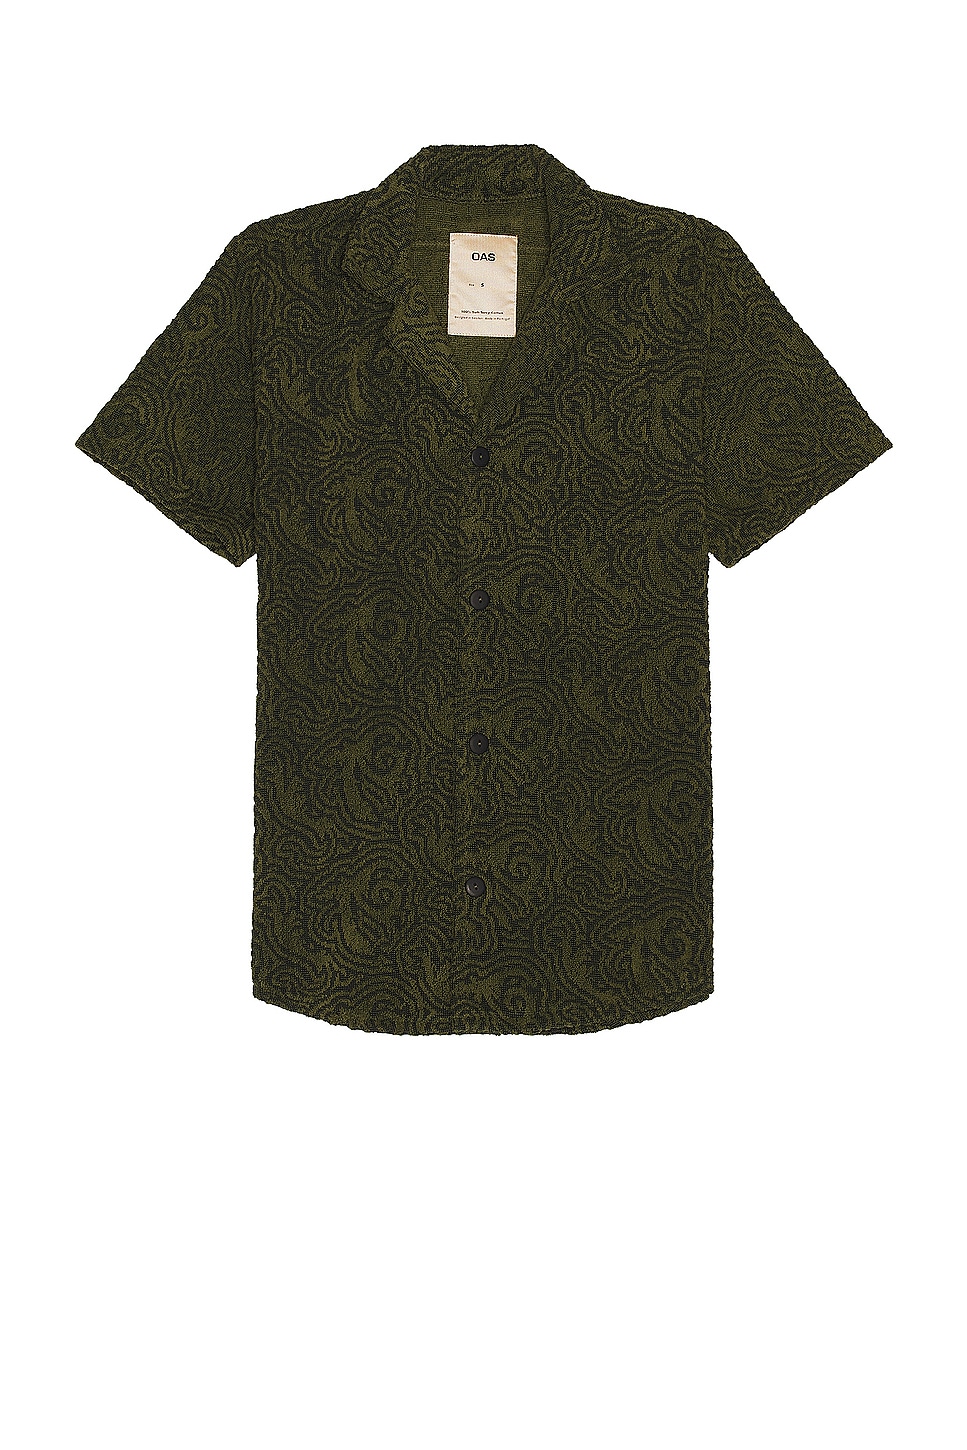 Image 1 of OAS Squiggle Cuba Terry Shirt in Dark Green